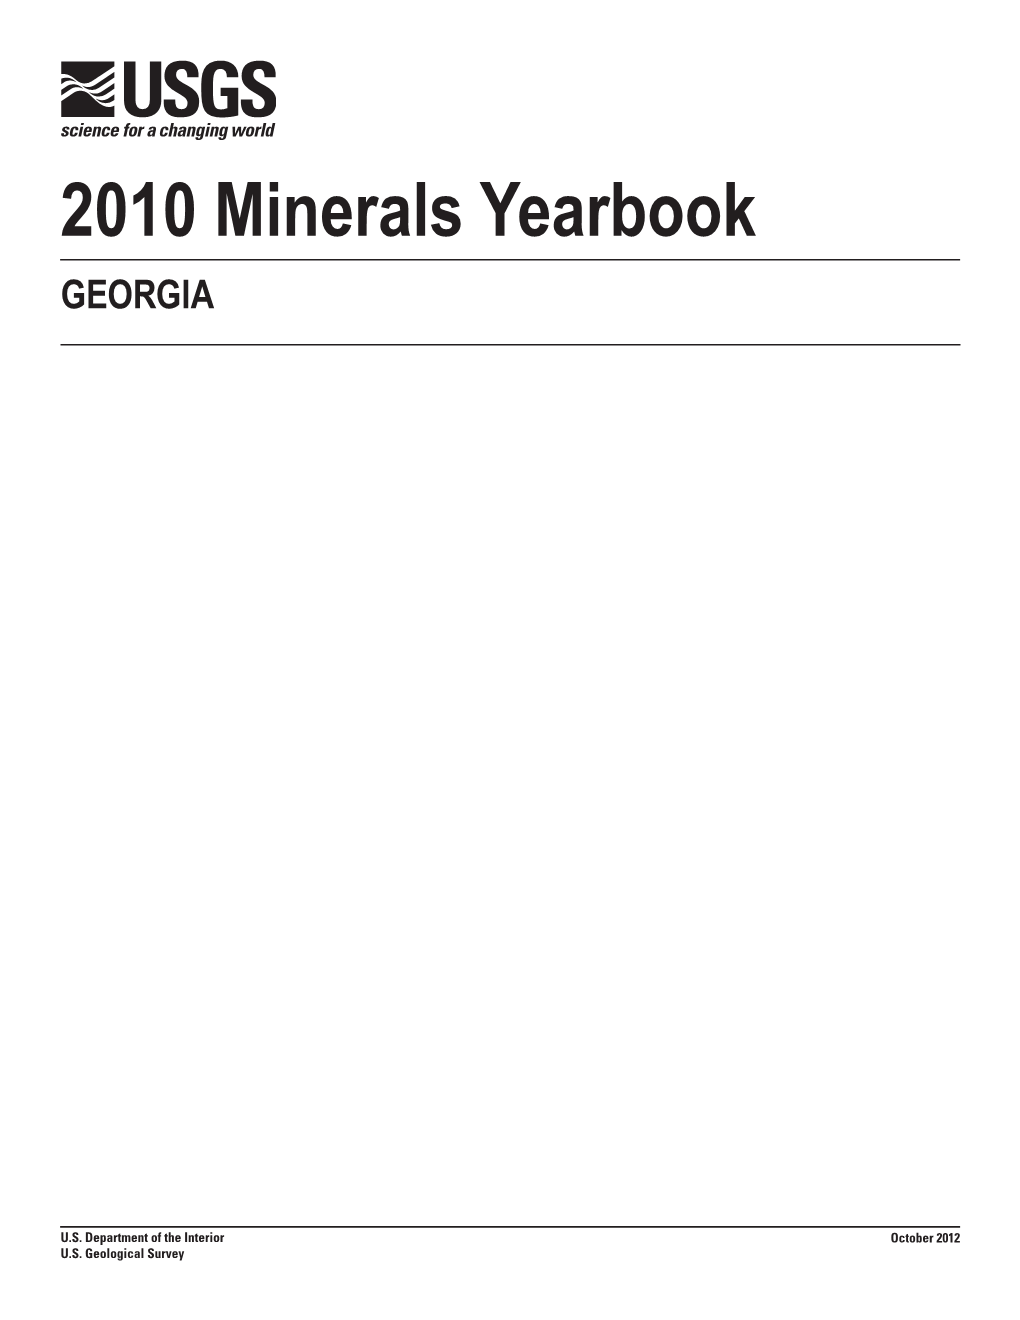 The Mineral Industry of Georgia in 2010